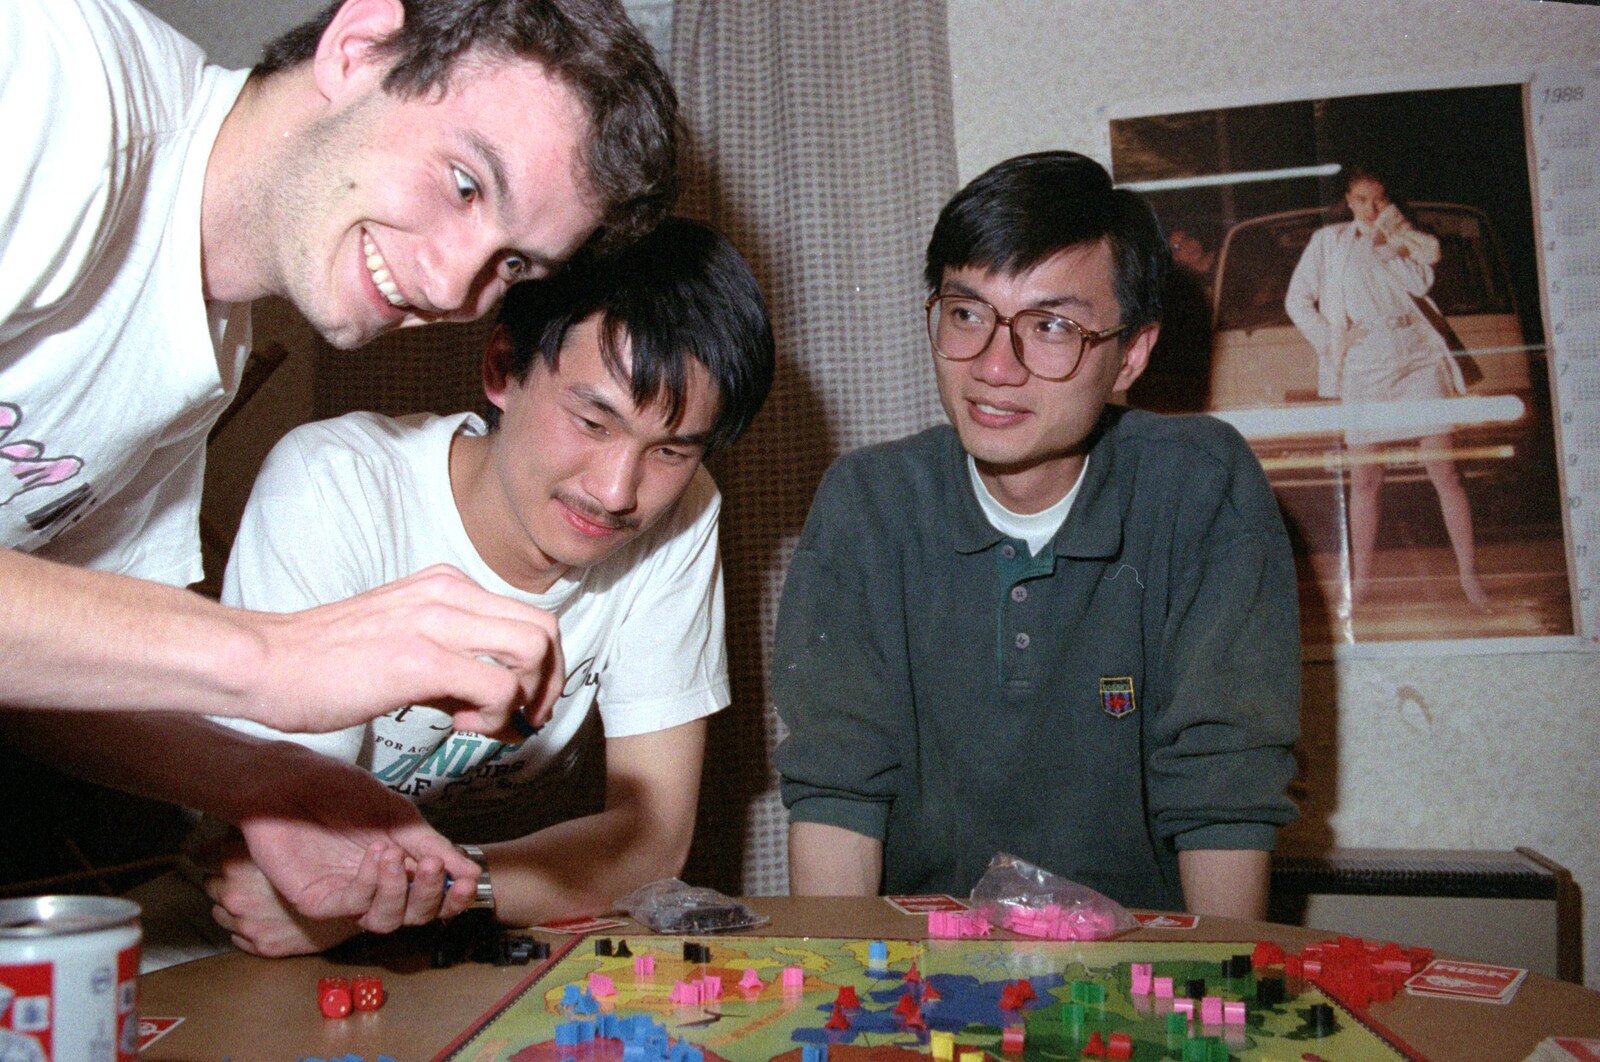 A major game of Risk ensues from Uni: Risky Business, A Wedding Occurs and Dave Leaves, Wyndham Square, Plymouth - 15th July 1989